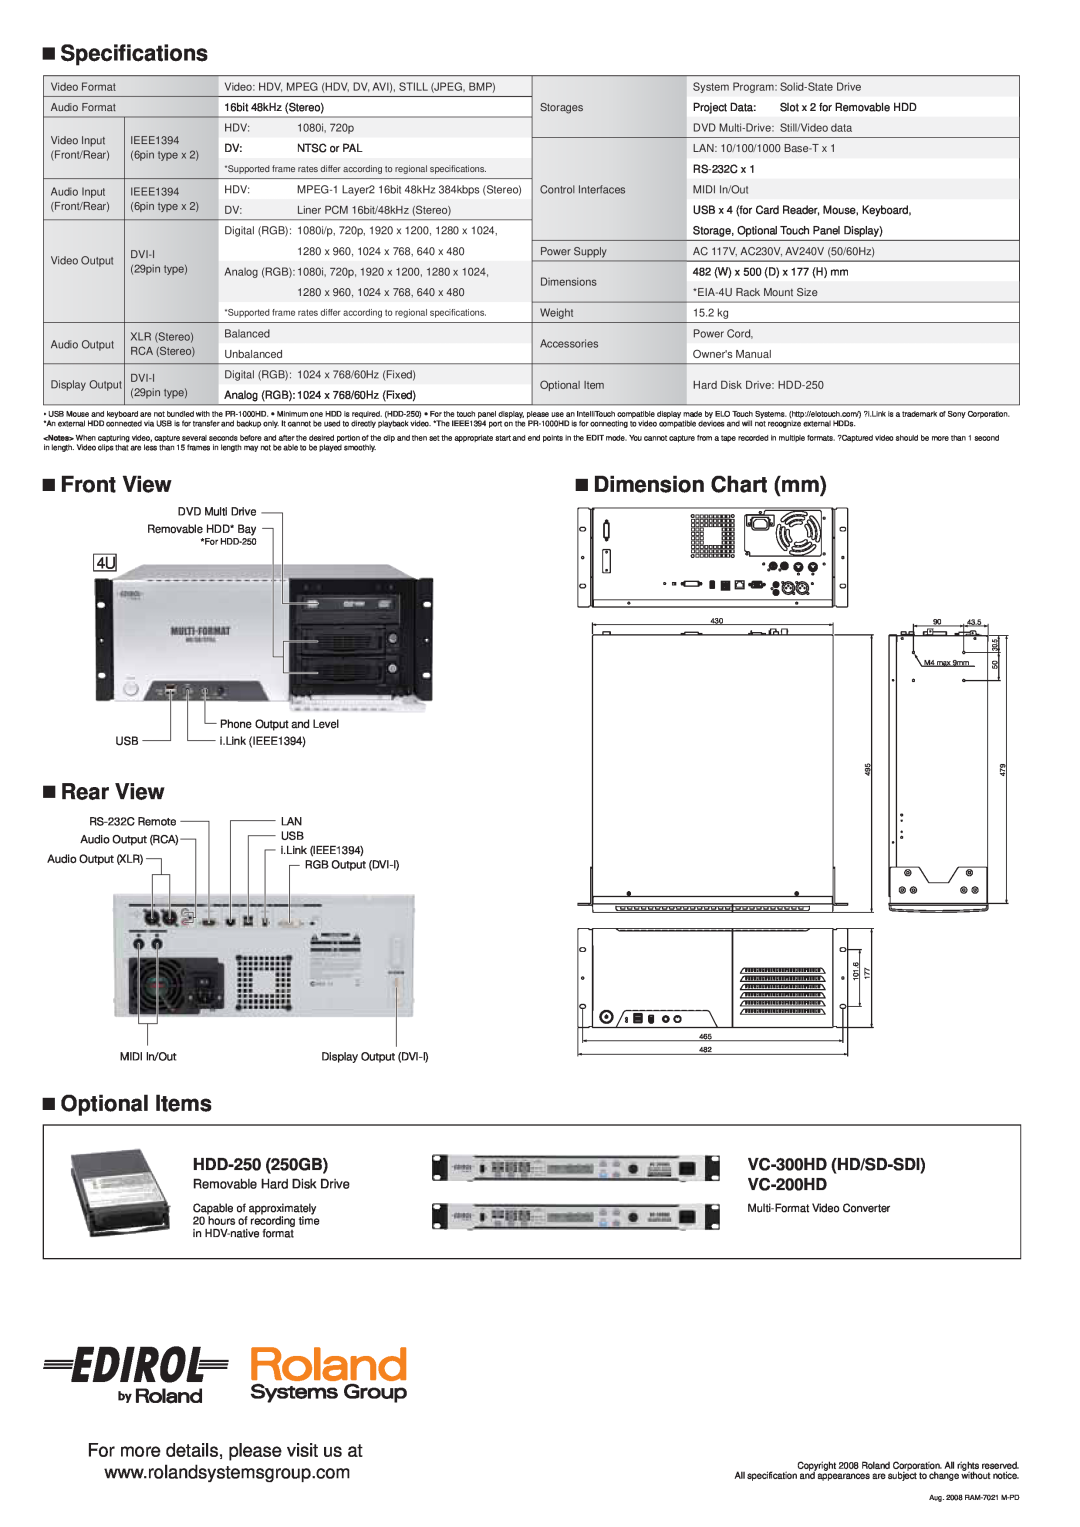 Edirol PR-1000HD manual Specifications, Front View, Dimension Chart mm, Rear View, Optional Items, HDD-250 250GB, VC-200HD 